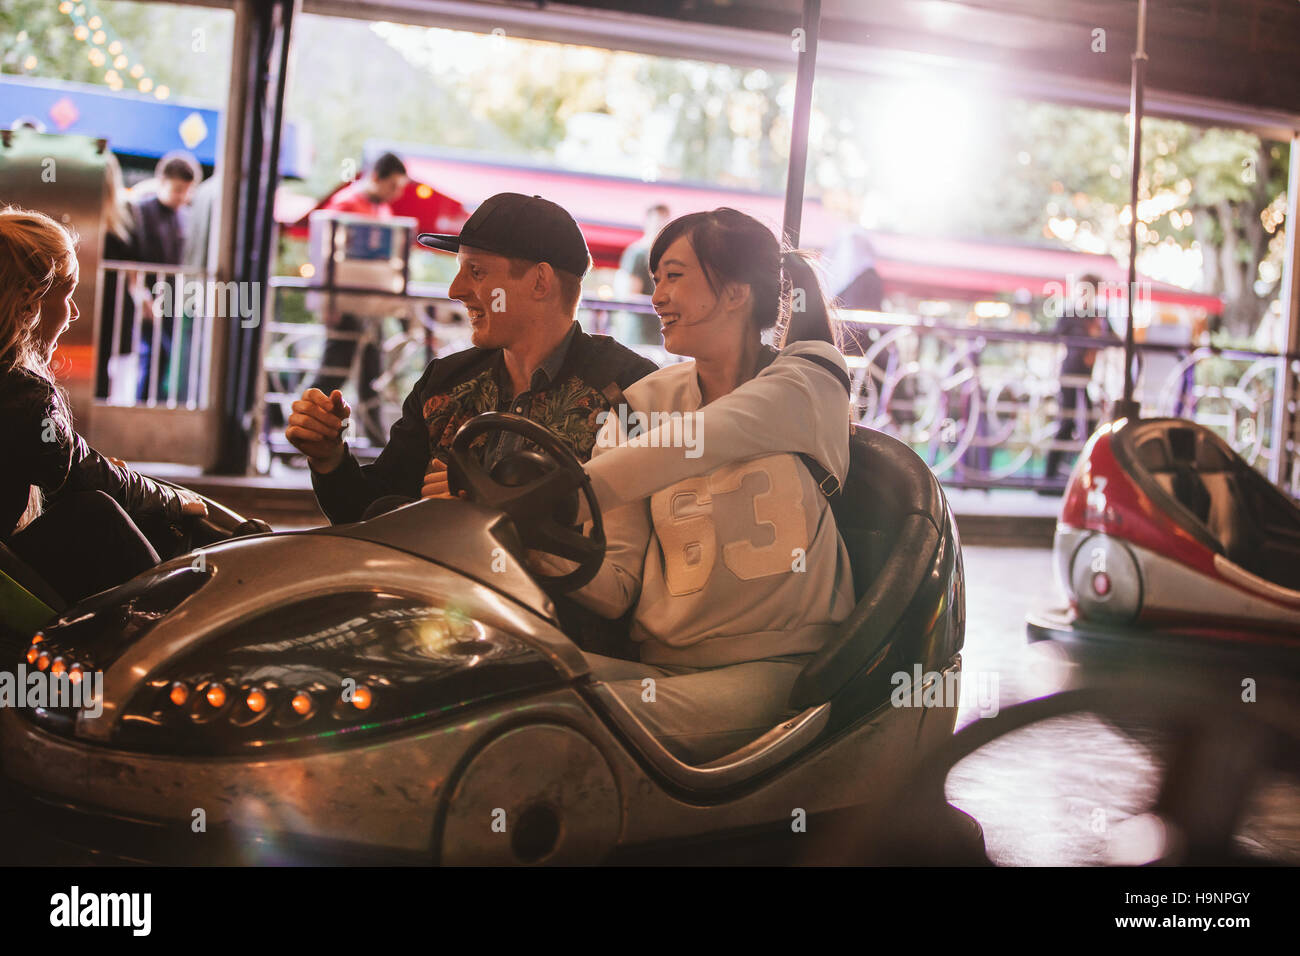 Friends on bumper car ride in amusement park. Young man and woman having fun with bumper cars at fairground. Stock Photo